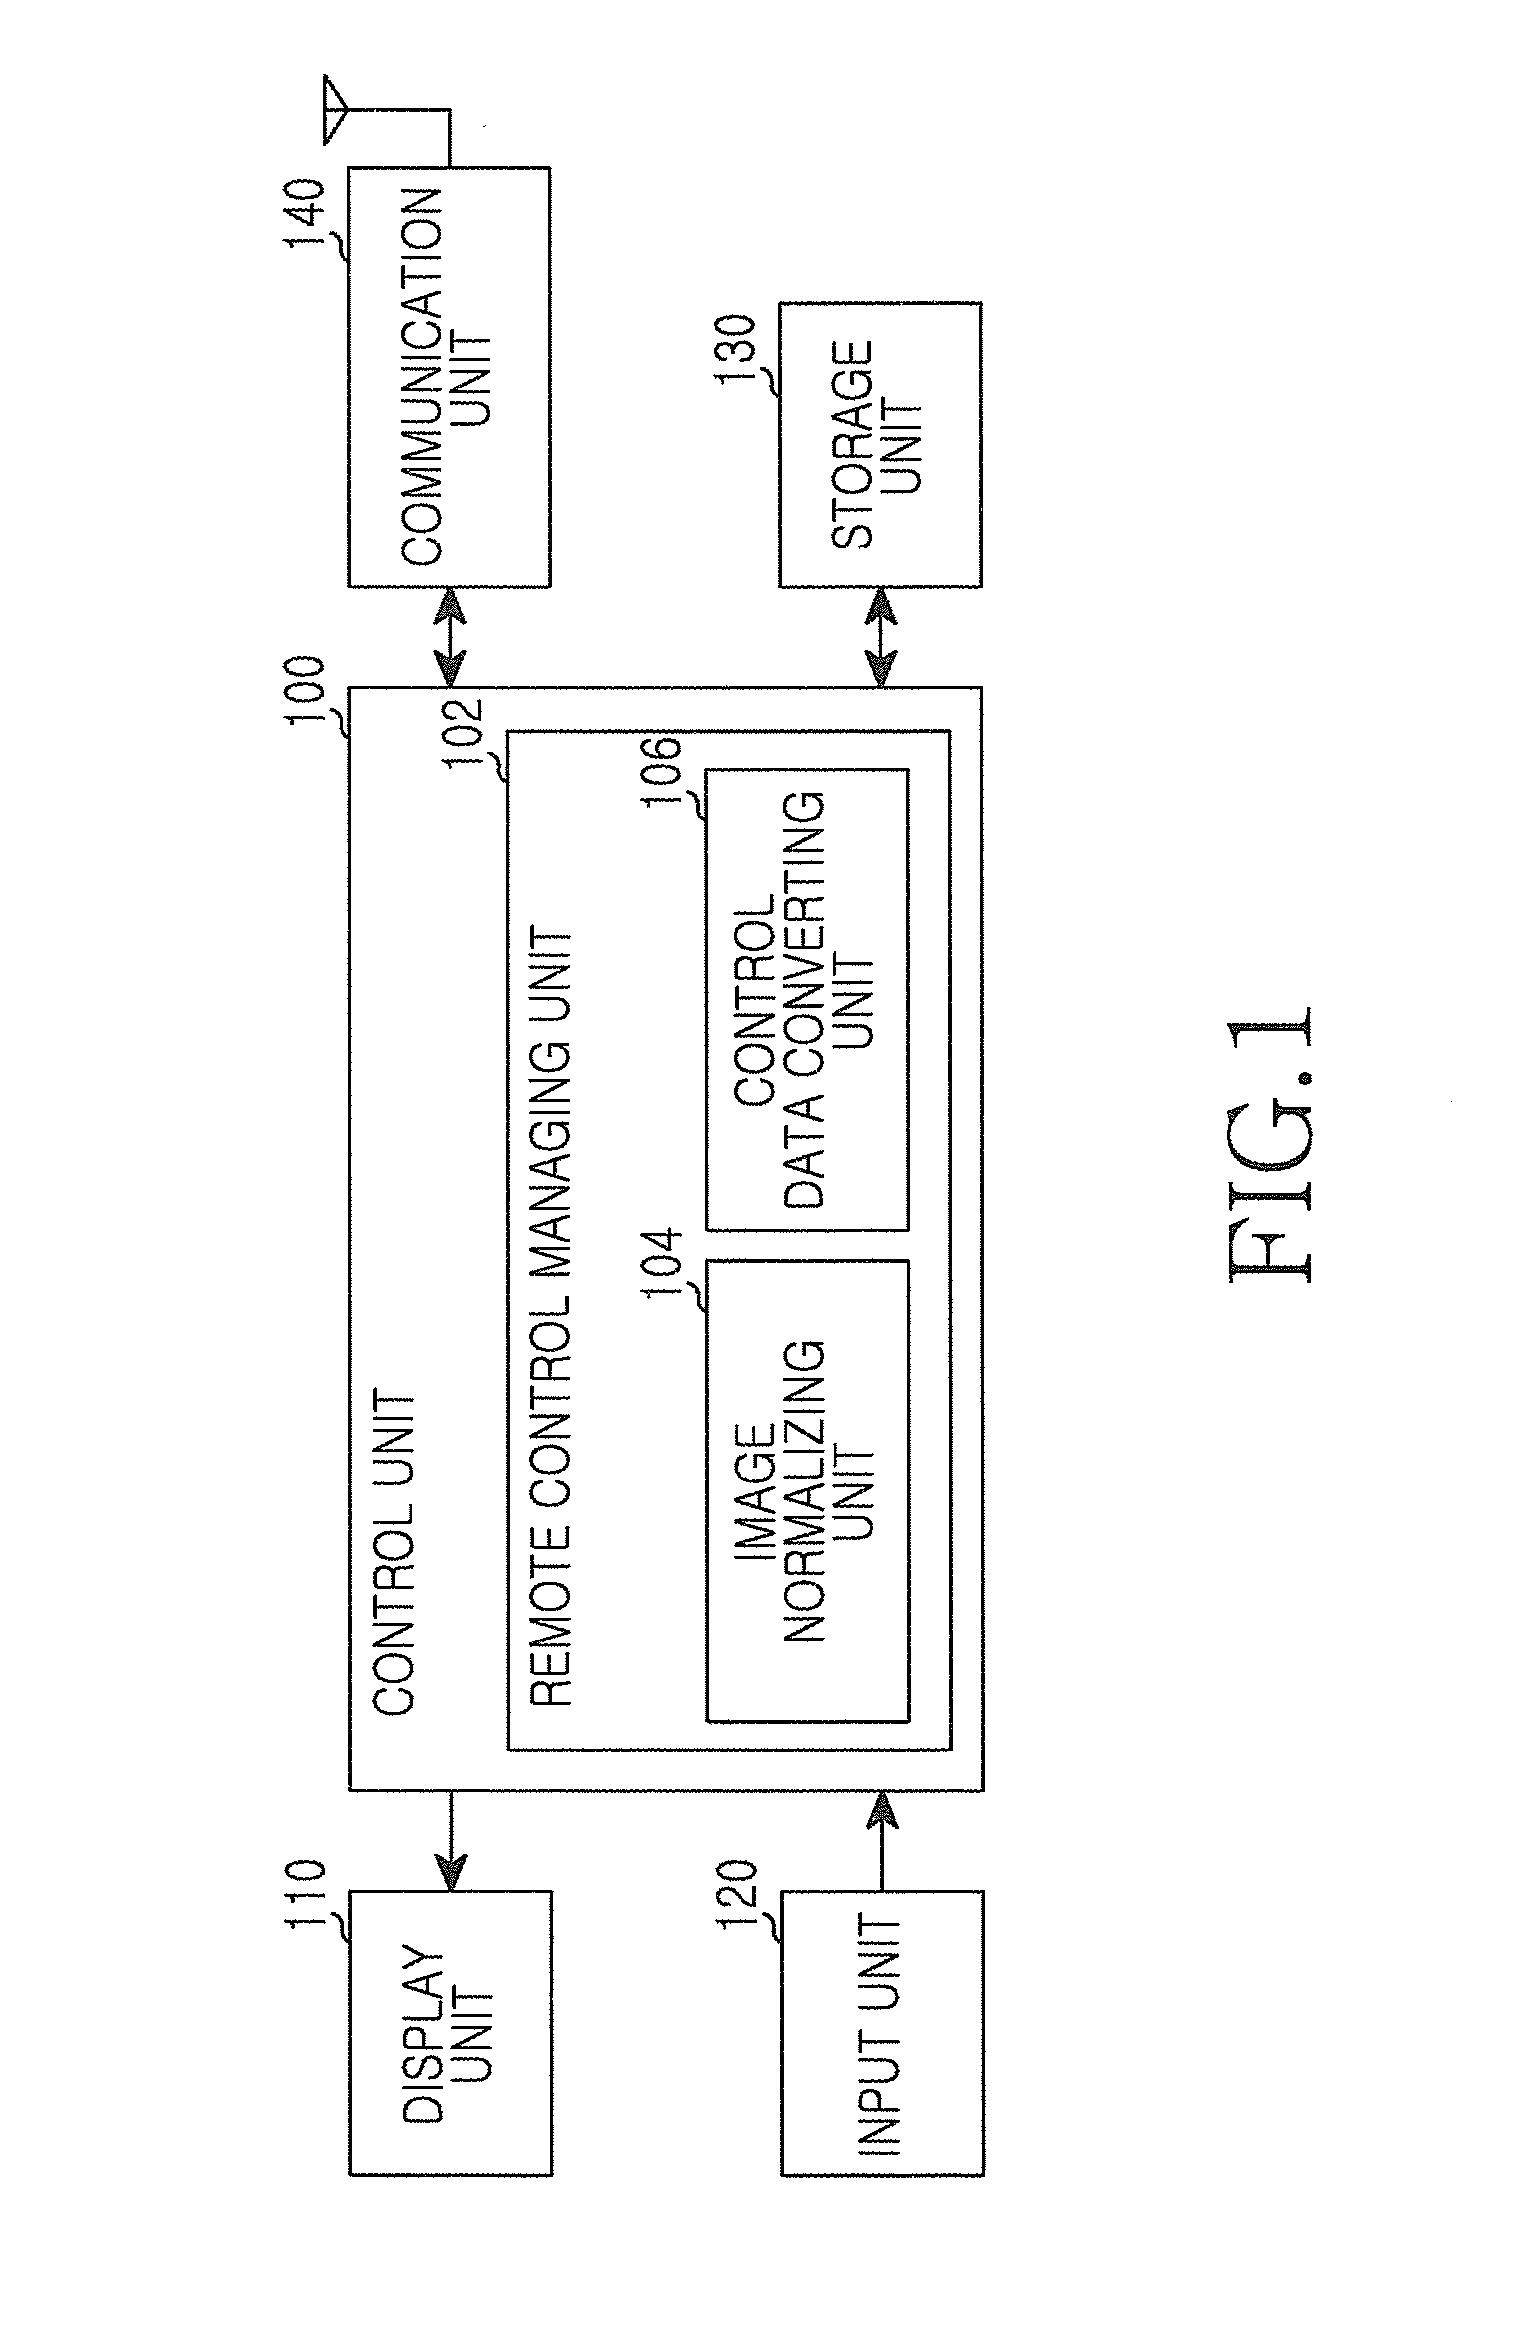 Apparatus and method for remote control between mobile communication terminals